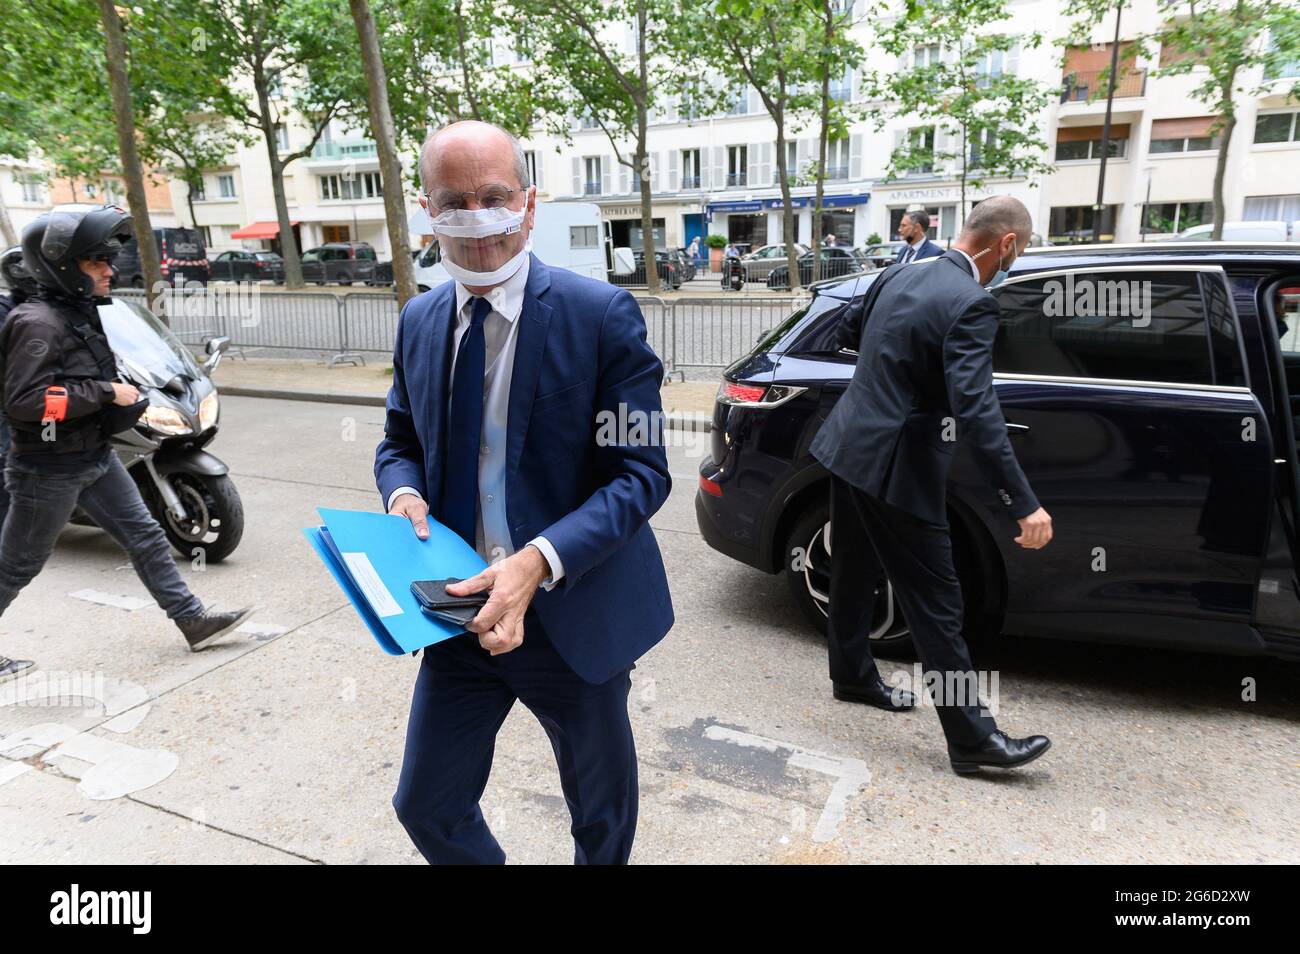 Arrival of Jean-Michel Blanquer, Minister of National Education, Youth and Sports, at the meeting of the Inter-ministerial Committee on Disability (CIH) in Paris, France, on July 05, 2021. Photo by Jacques Witt/Pool/ABACAPRESS.COM Stock Photo